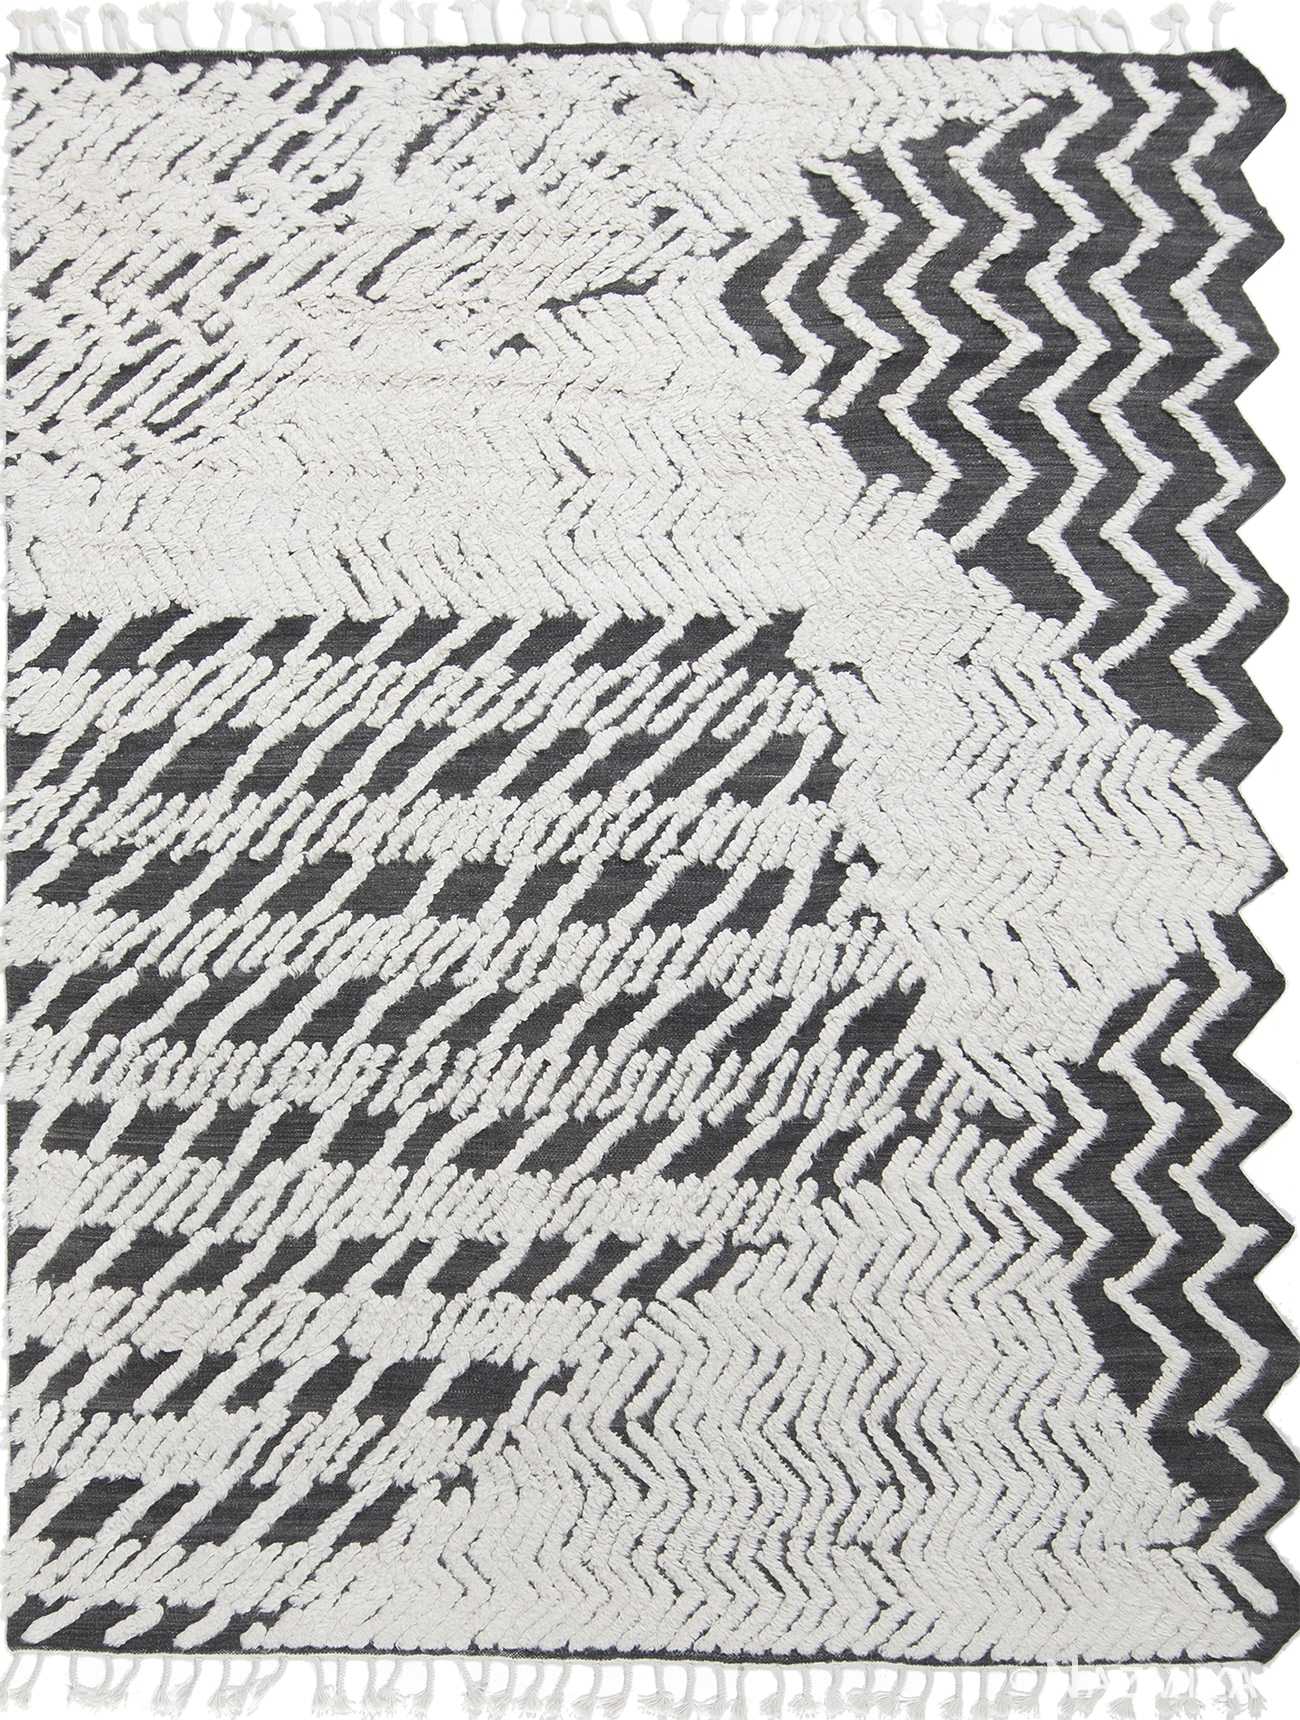 Modernist Black and White High Low Wool Pile Rug #172785471 by Nazmiyal Antique Rugs